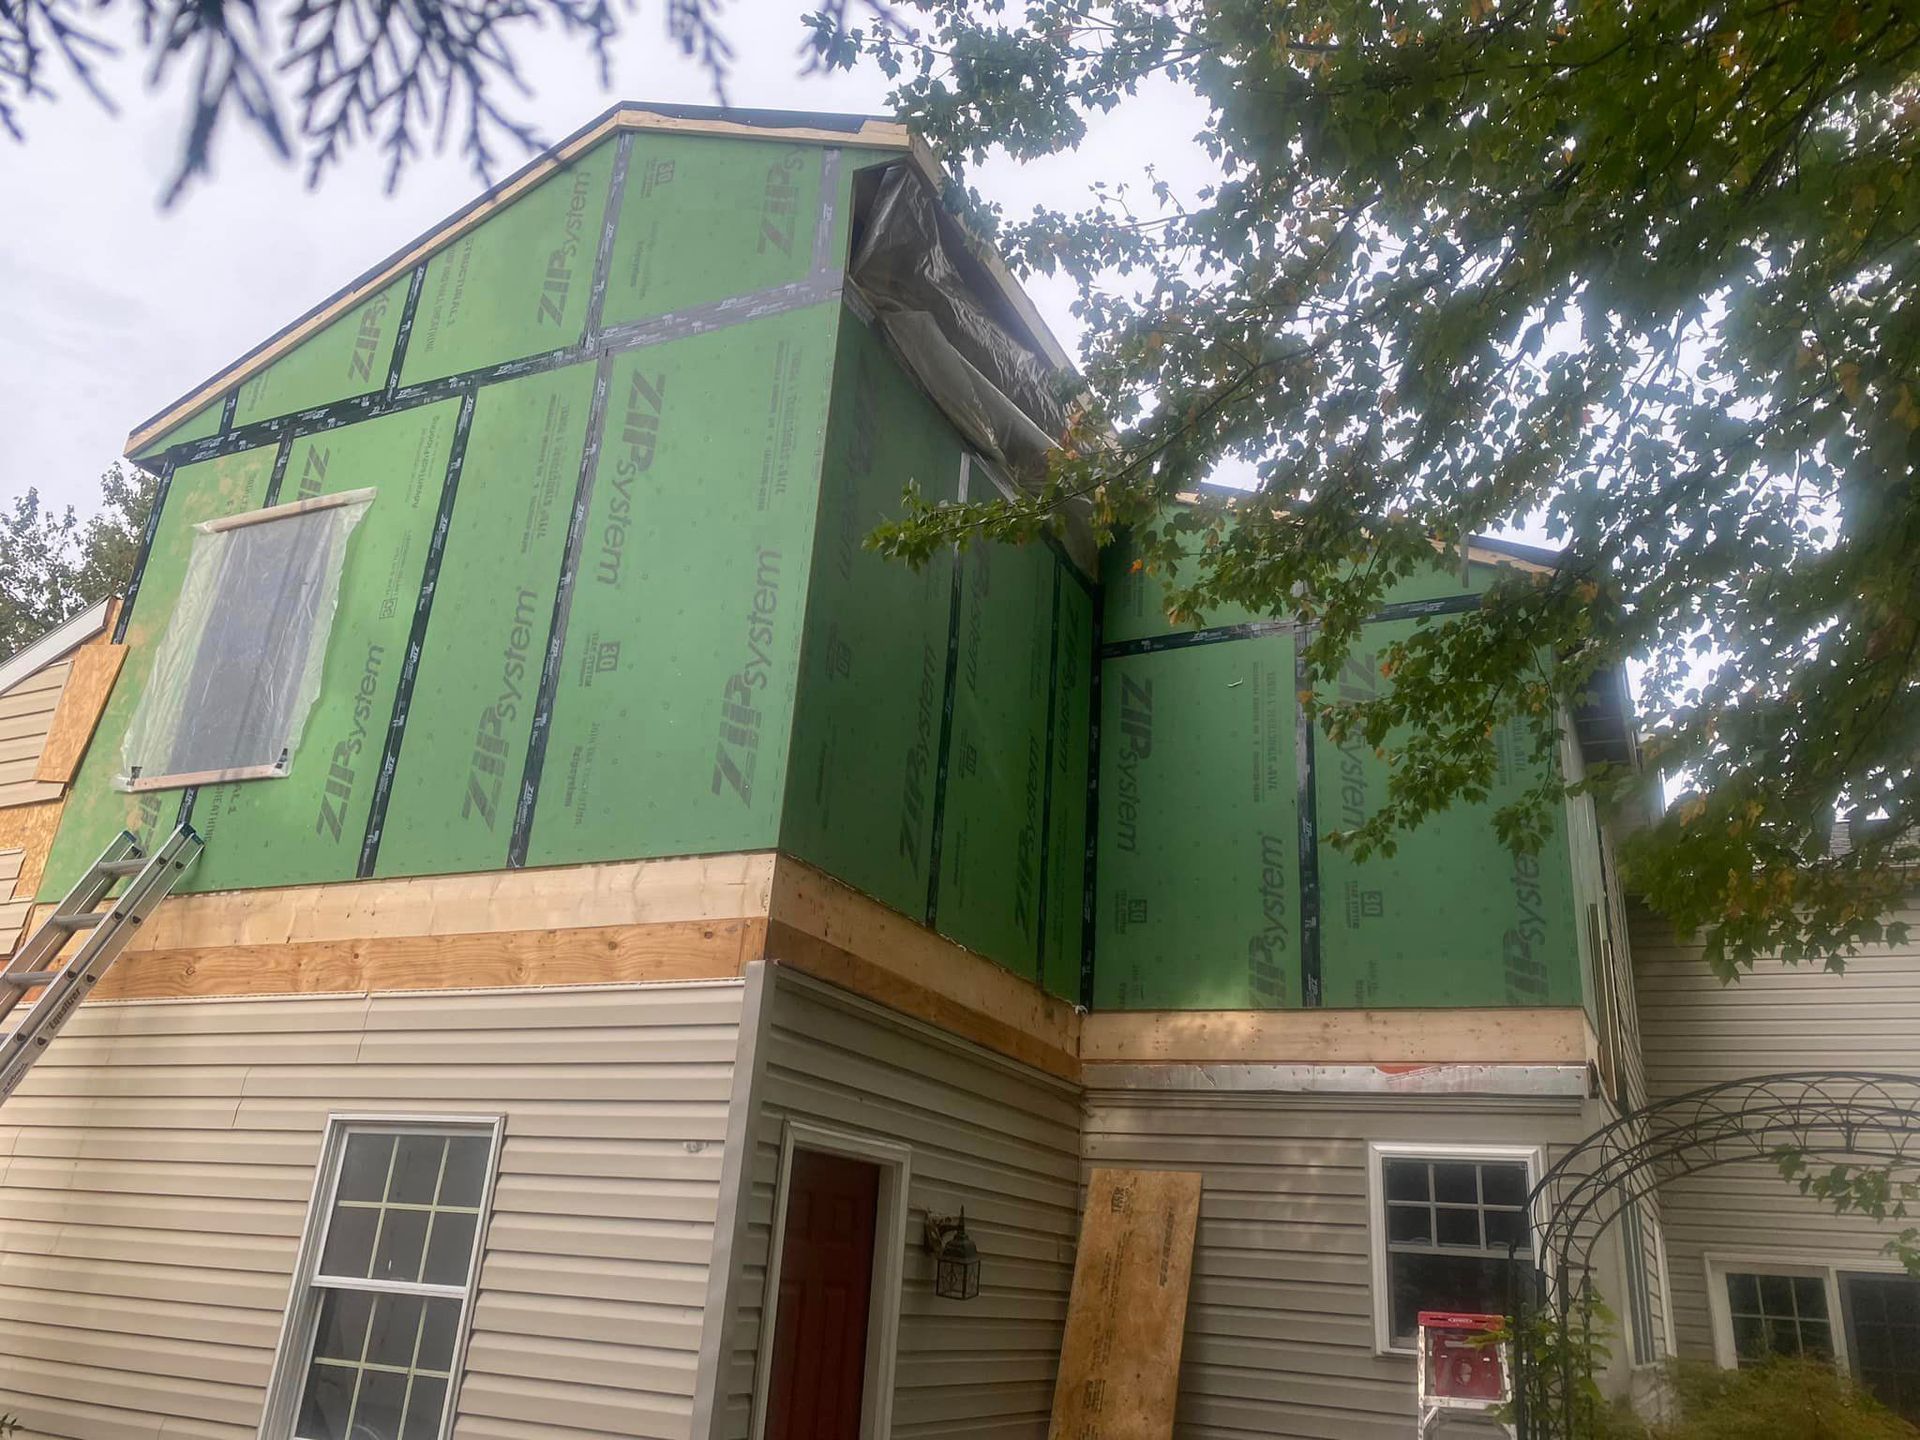 A house is being remodeled with green siding and a ladder